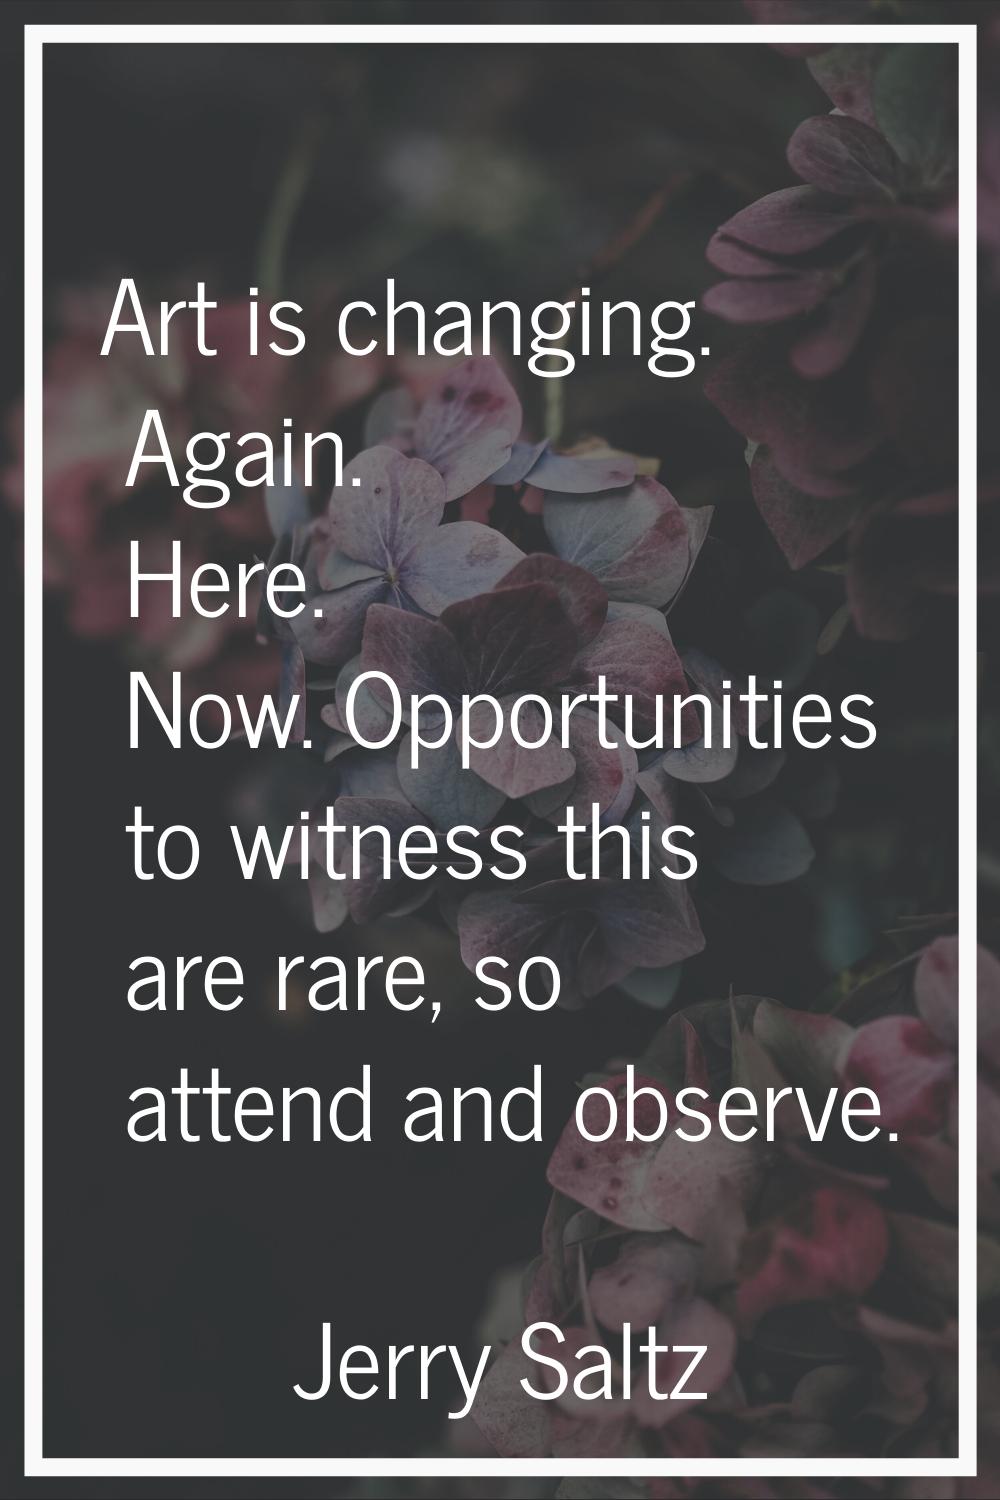 Art is changing. Again. Here. Now. Opportunities to witness this are rare, so attend and observe.